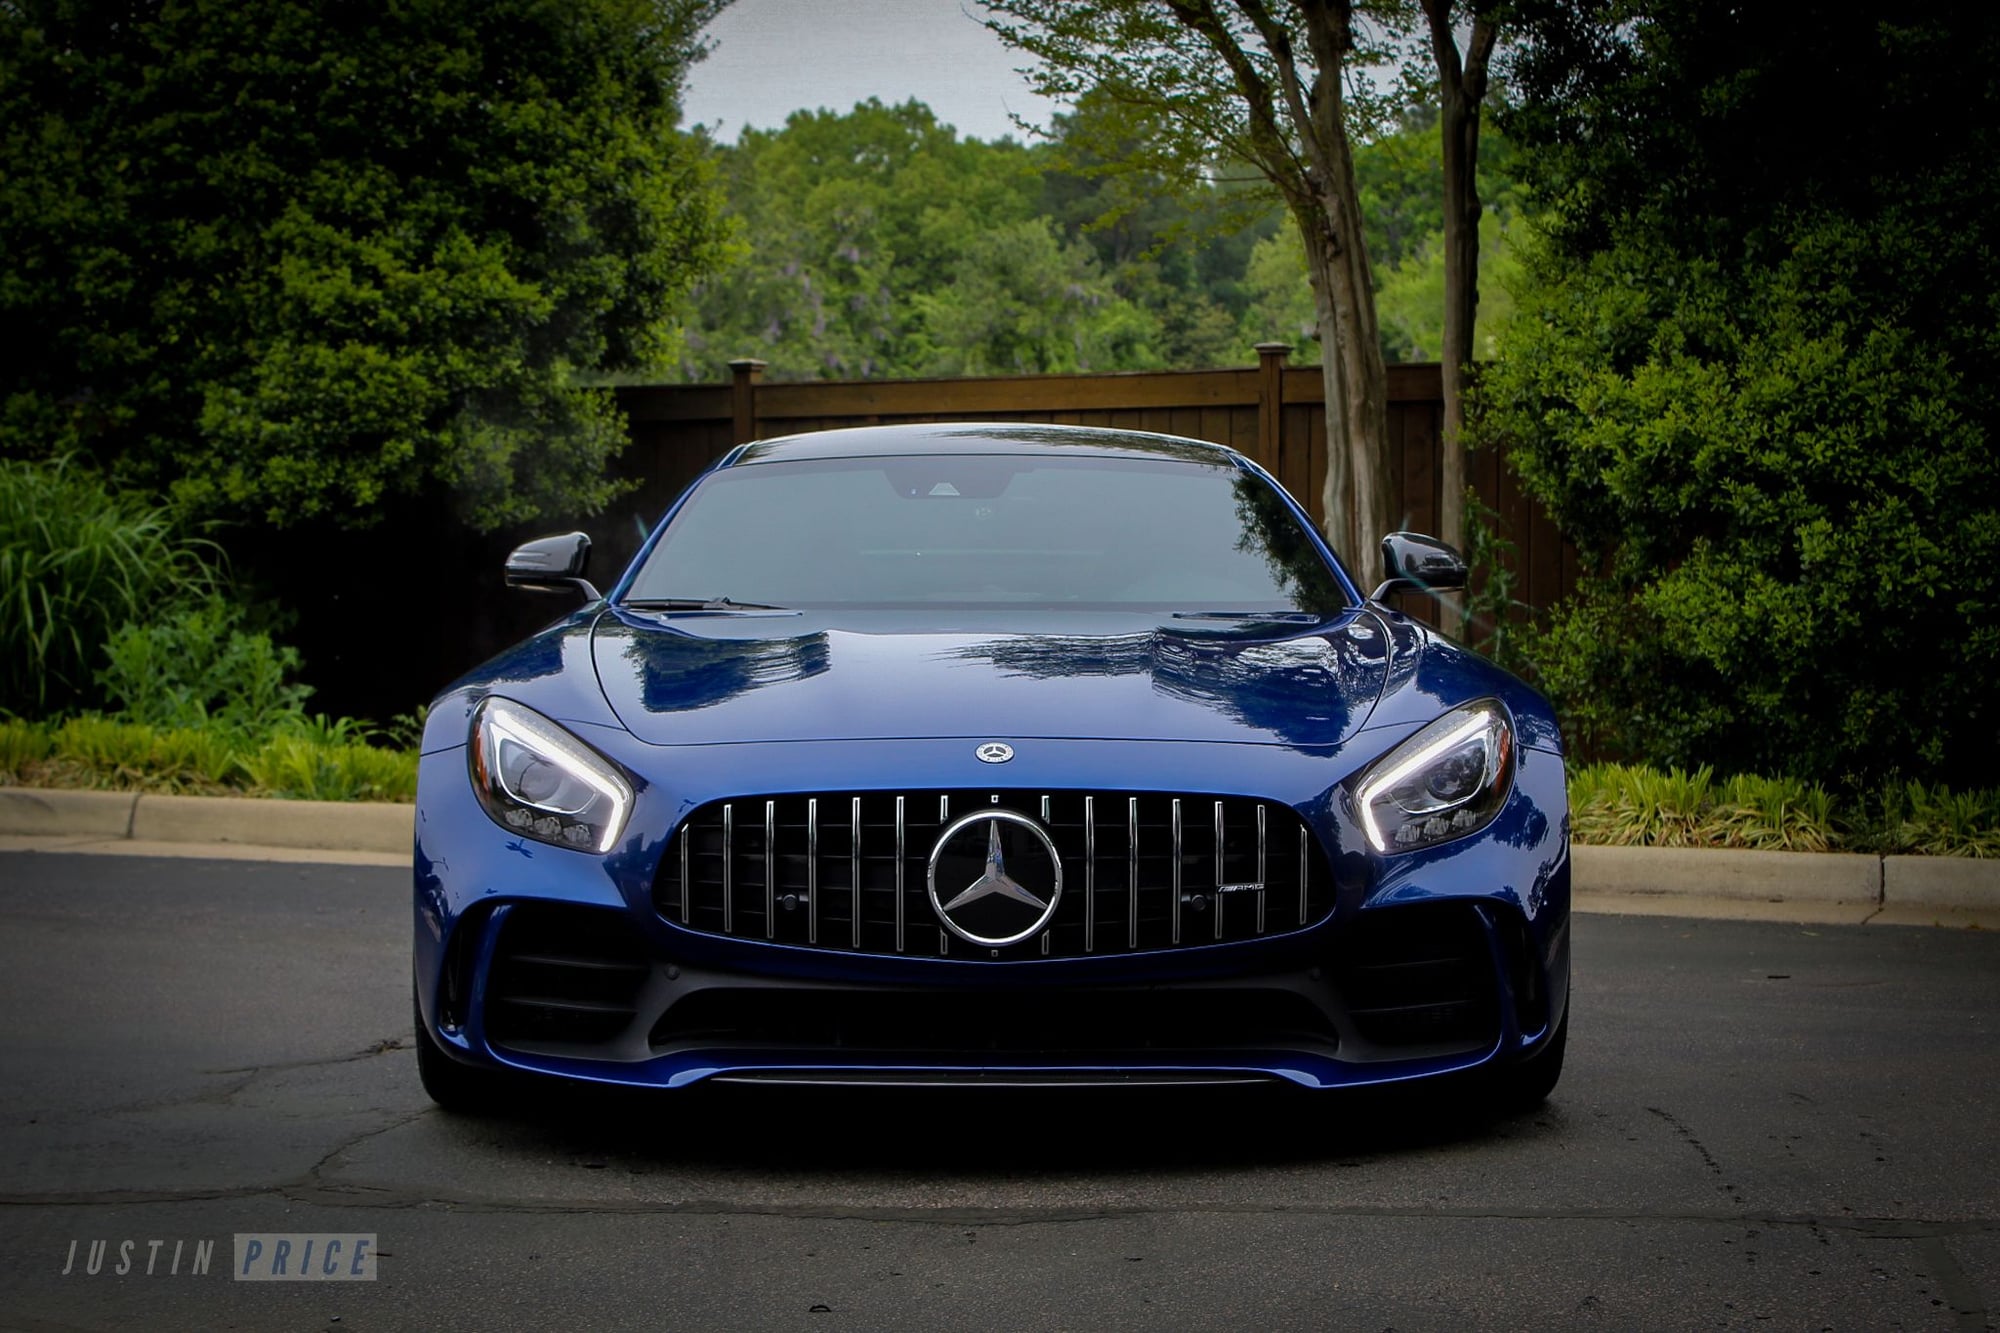 2018 Mercedes-Benz AMG GT R - 2018 Mercedes AMG GTR - Used - VIN WDDYJ7KAXJA021678 - 8,558 Miles - 8 cyl - 2WD - Automatic - Coupe - Blue - Richmond, VA 23113, United States